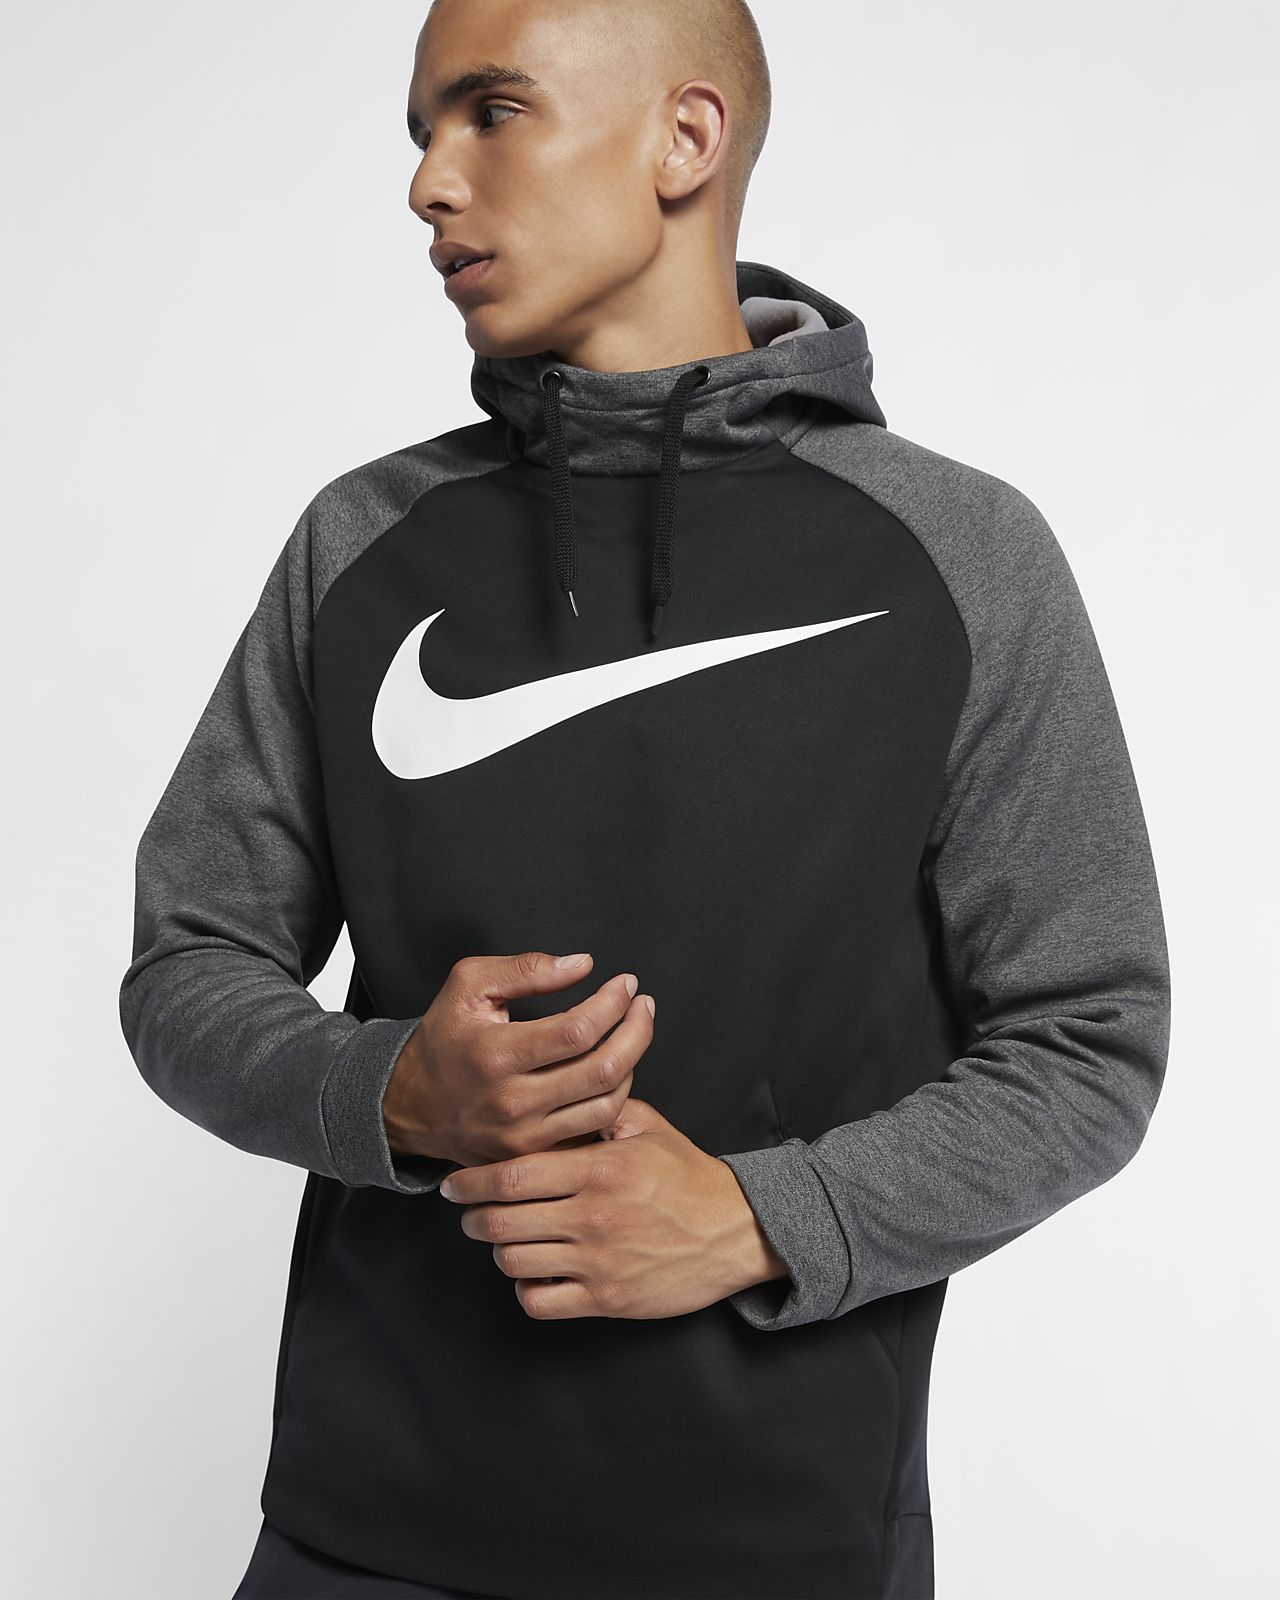 Buy > nike swoosh on right side > in stock